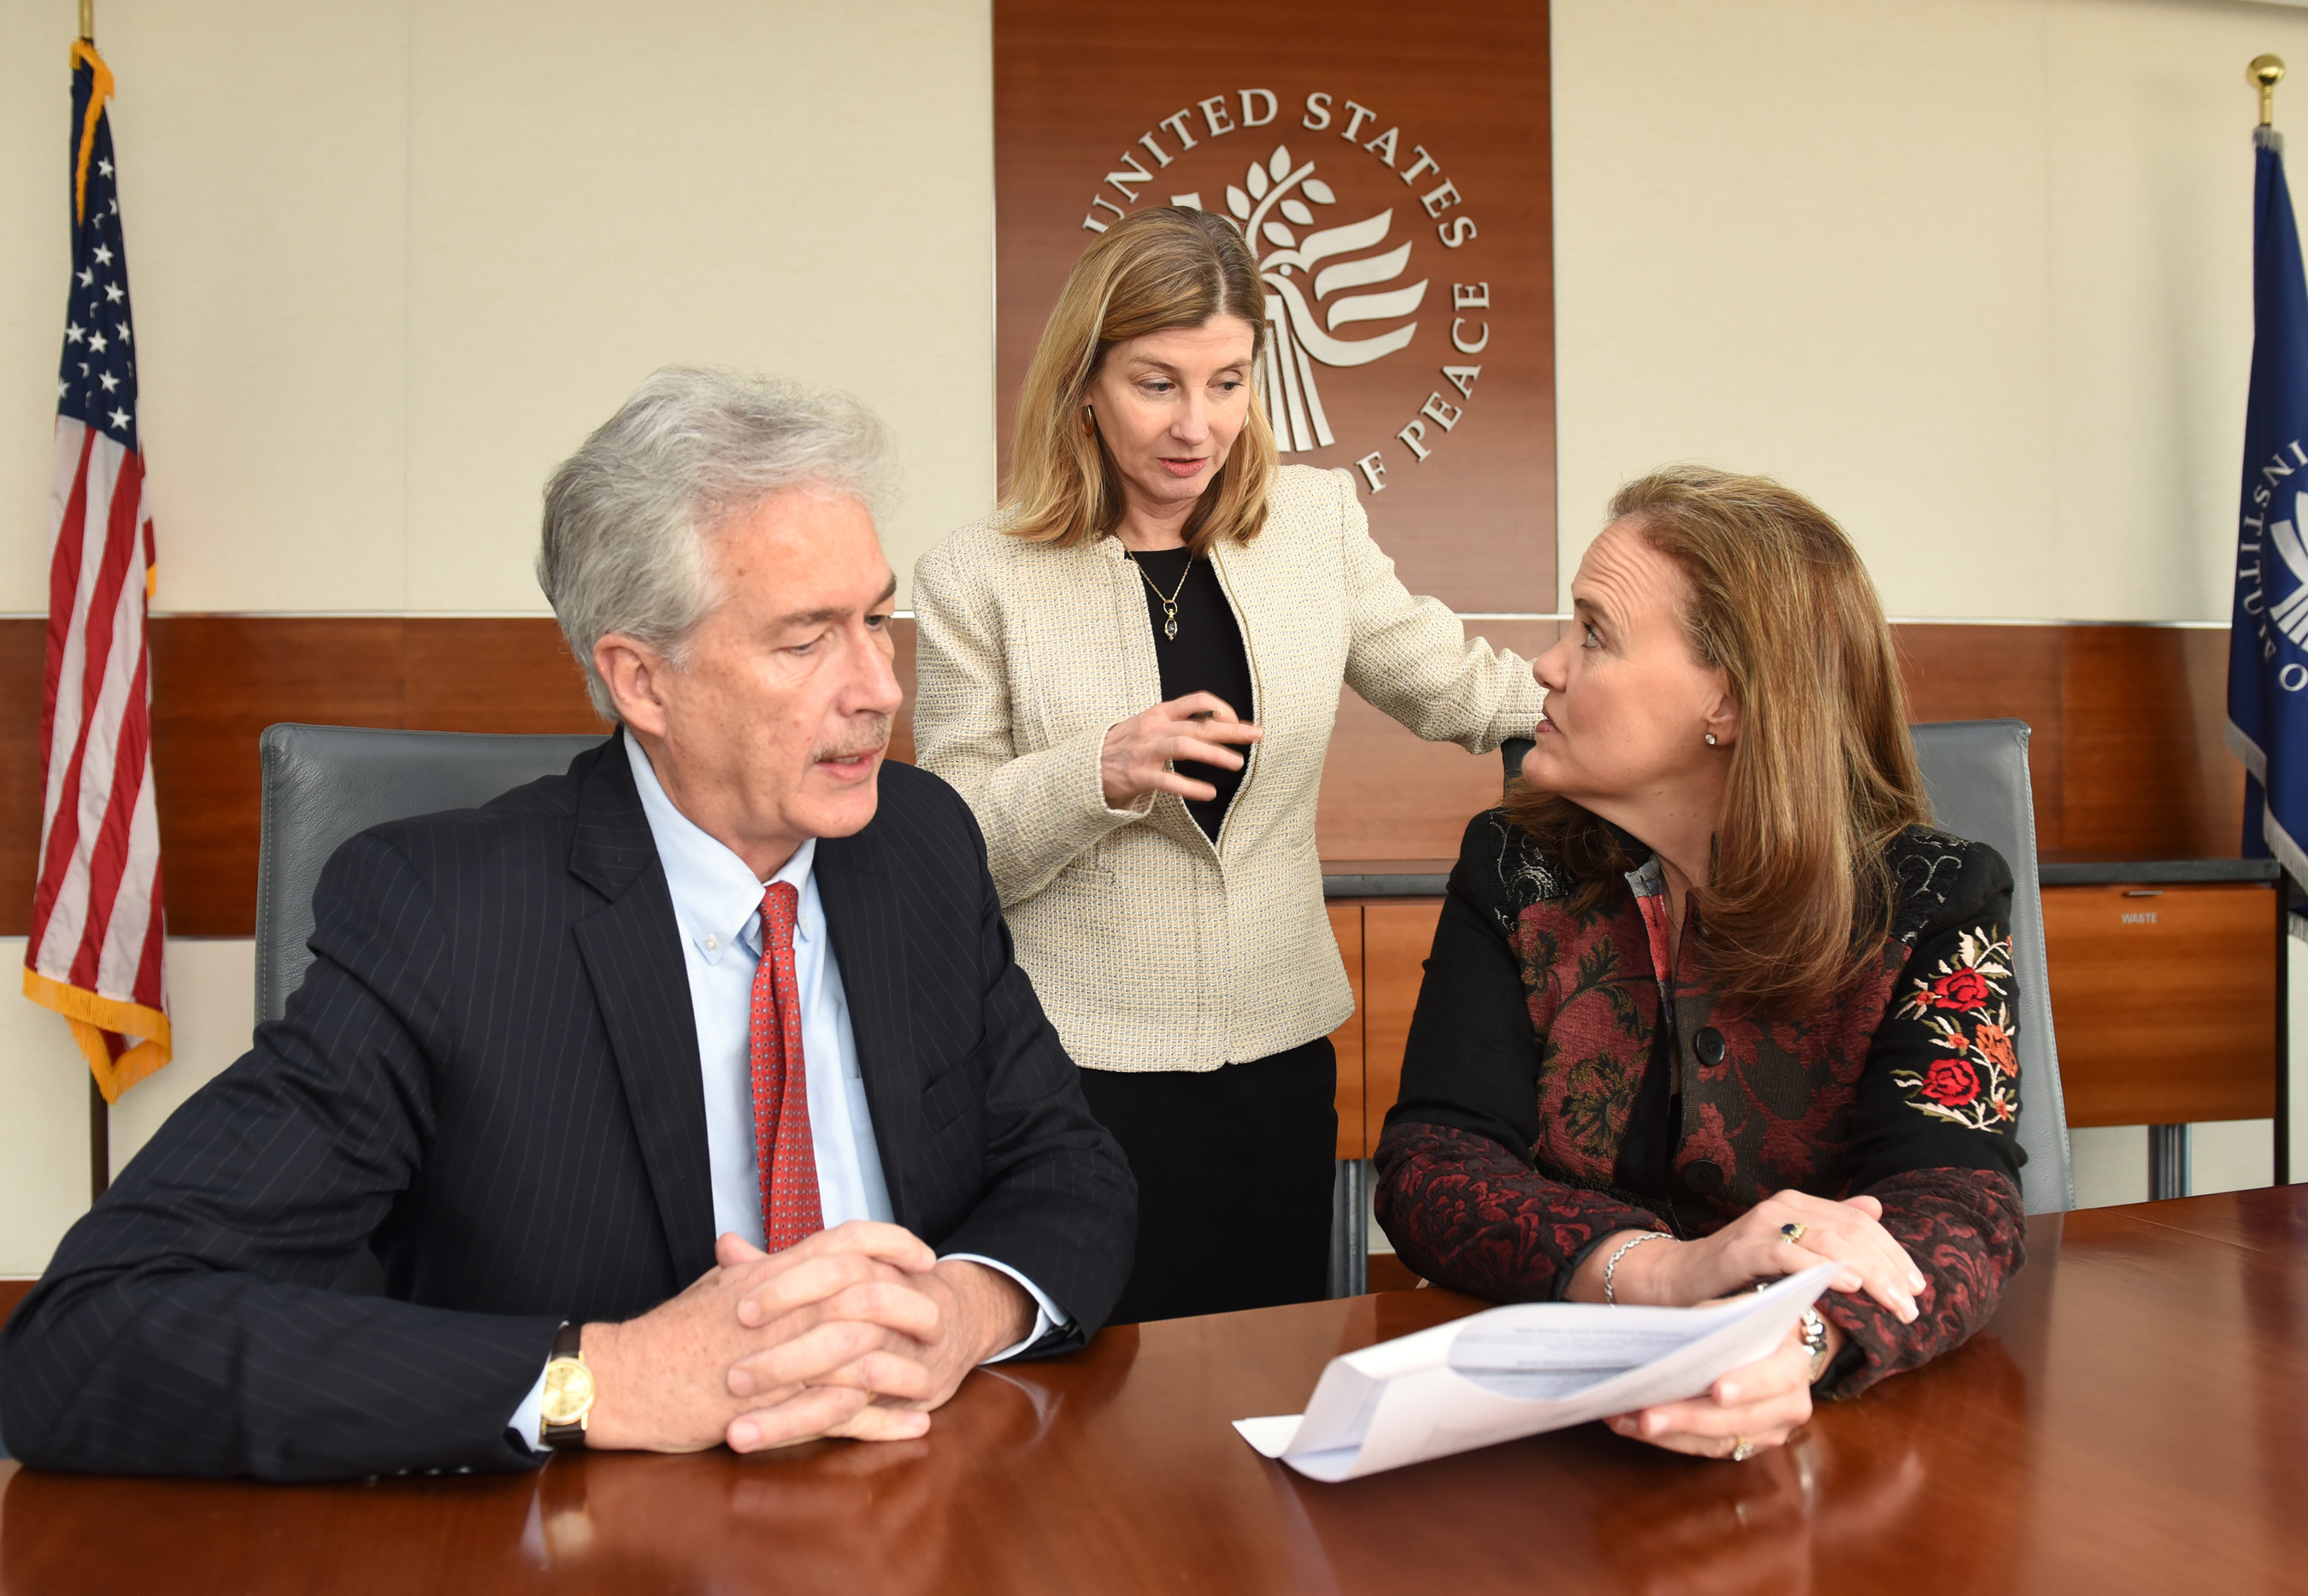 From L to R: Carnegie Endowment for International Peace President William J. Burns (former deputy secretary of state); U.S. Institute of Peace President Nancy Lindborg (former assistant administrator for the Bureau for Democracy, Conflict and Humanitarian Assistance at the U.S. Agency for International Development); and Center for a New American Security CEO Michele Flournoy (former undersecretary of defense for policy) launched the Study Group on Fragility today.